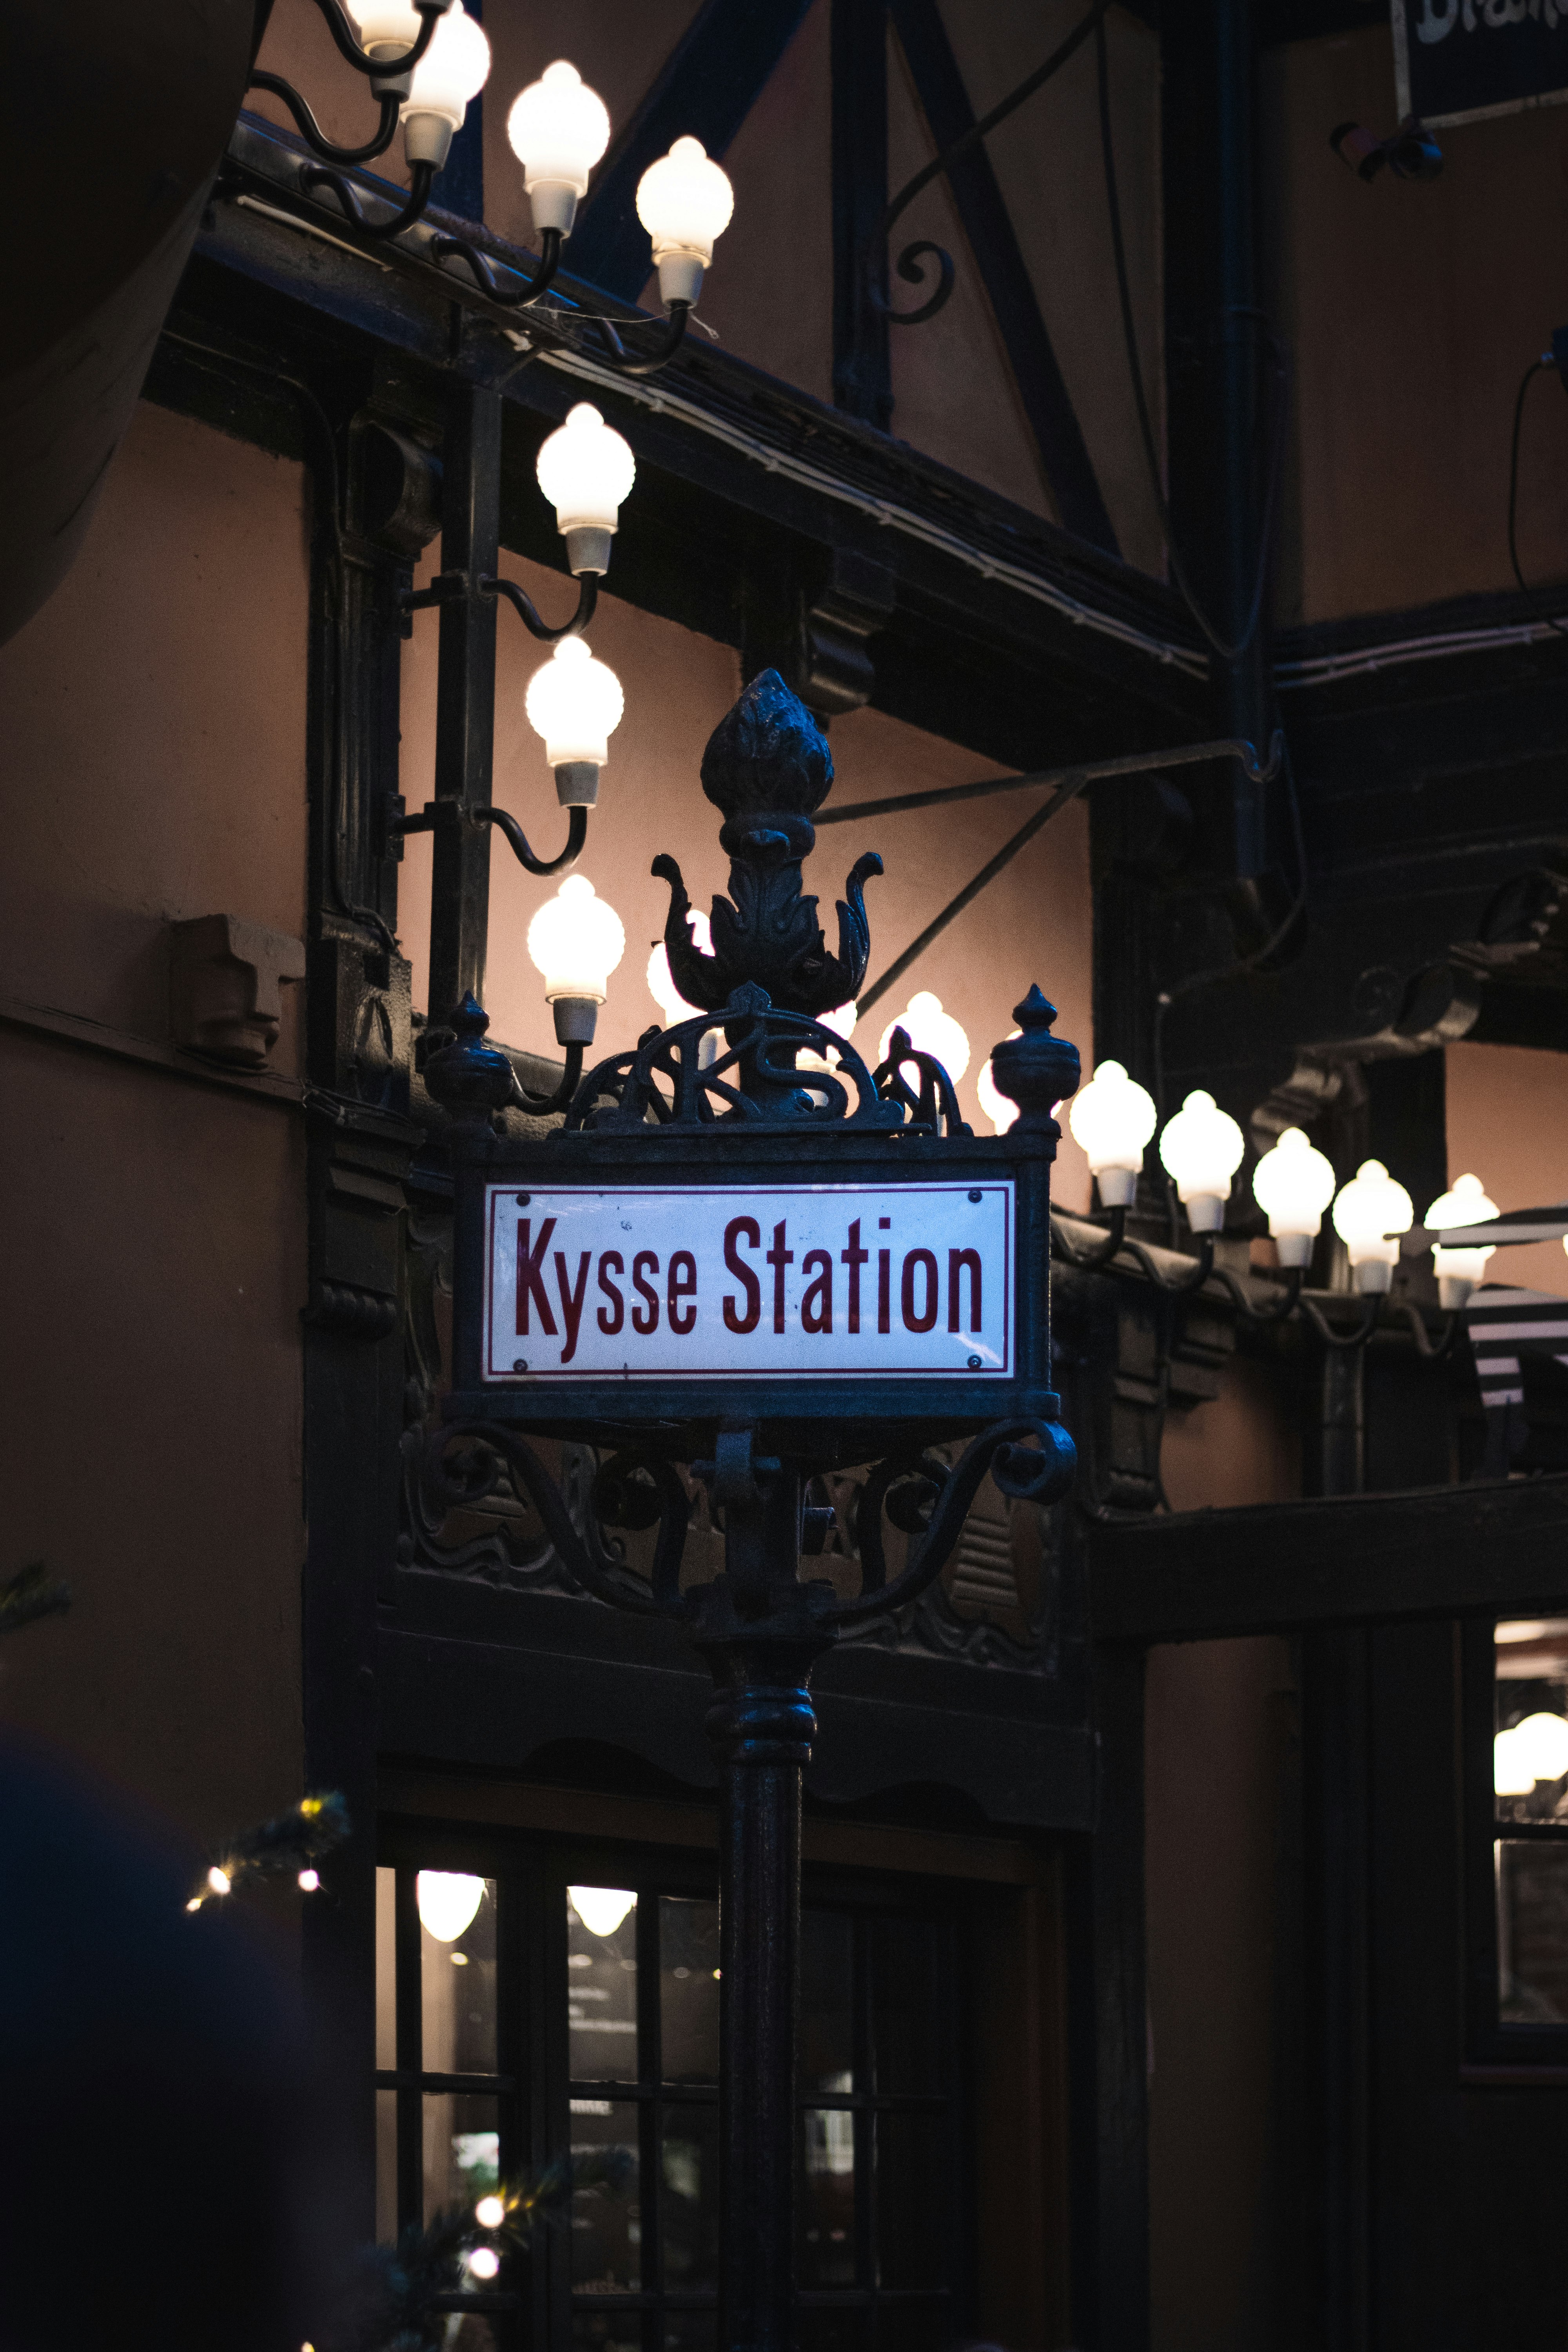 Kysse Station sign near lighted lamps